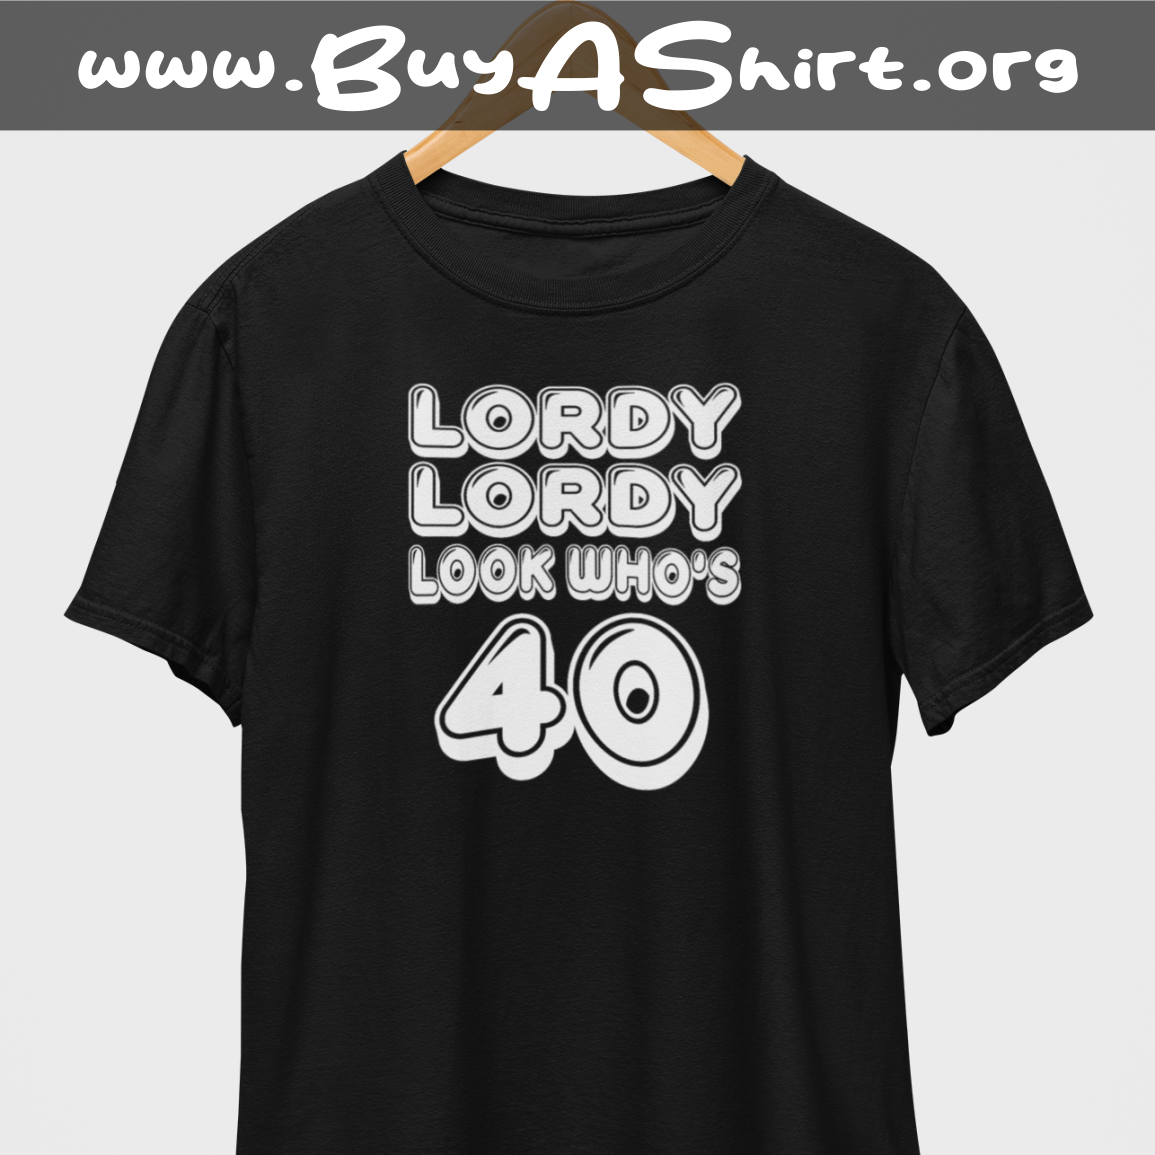 Lordy Lordy Look Who's 40 White Print T-Shirt